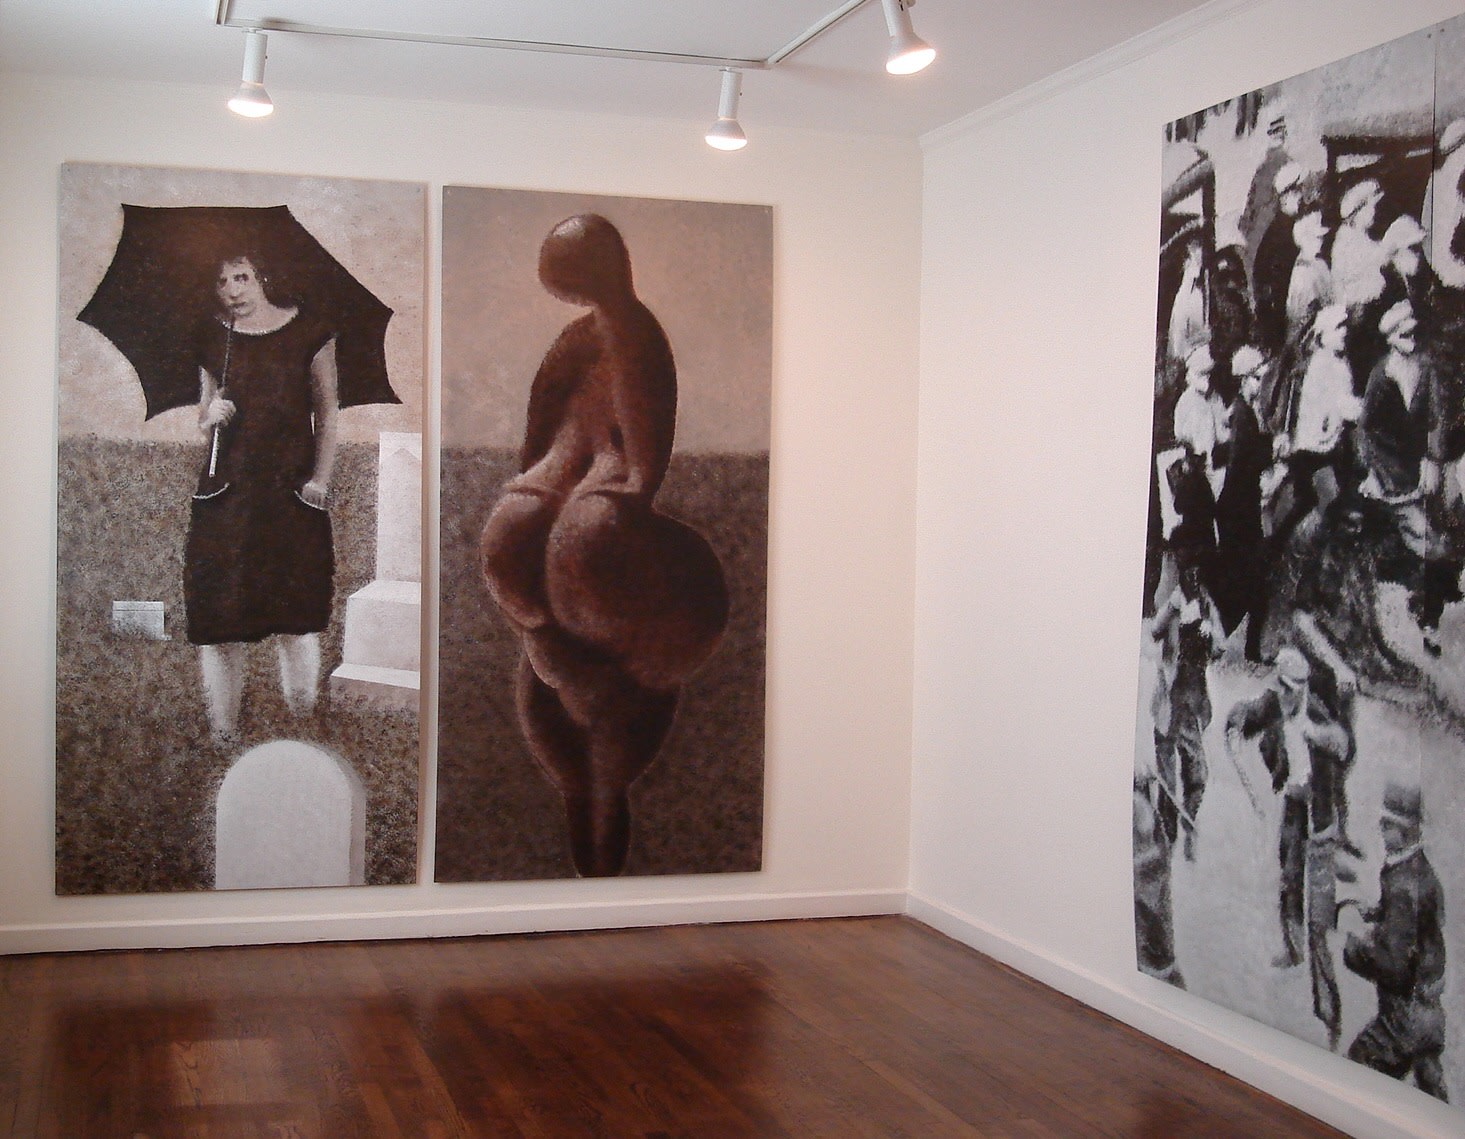 Installation view, Robert Morris: 1934 and Before, 18 EAST 77